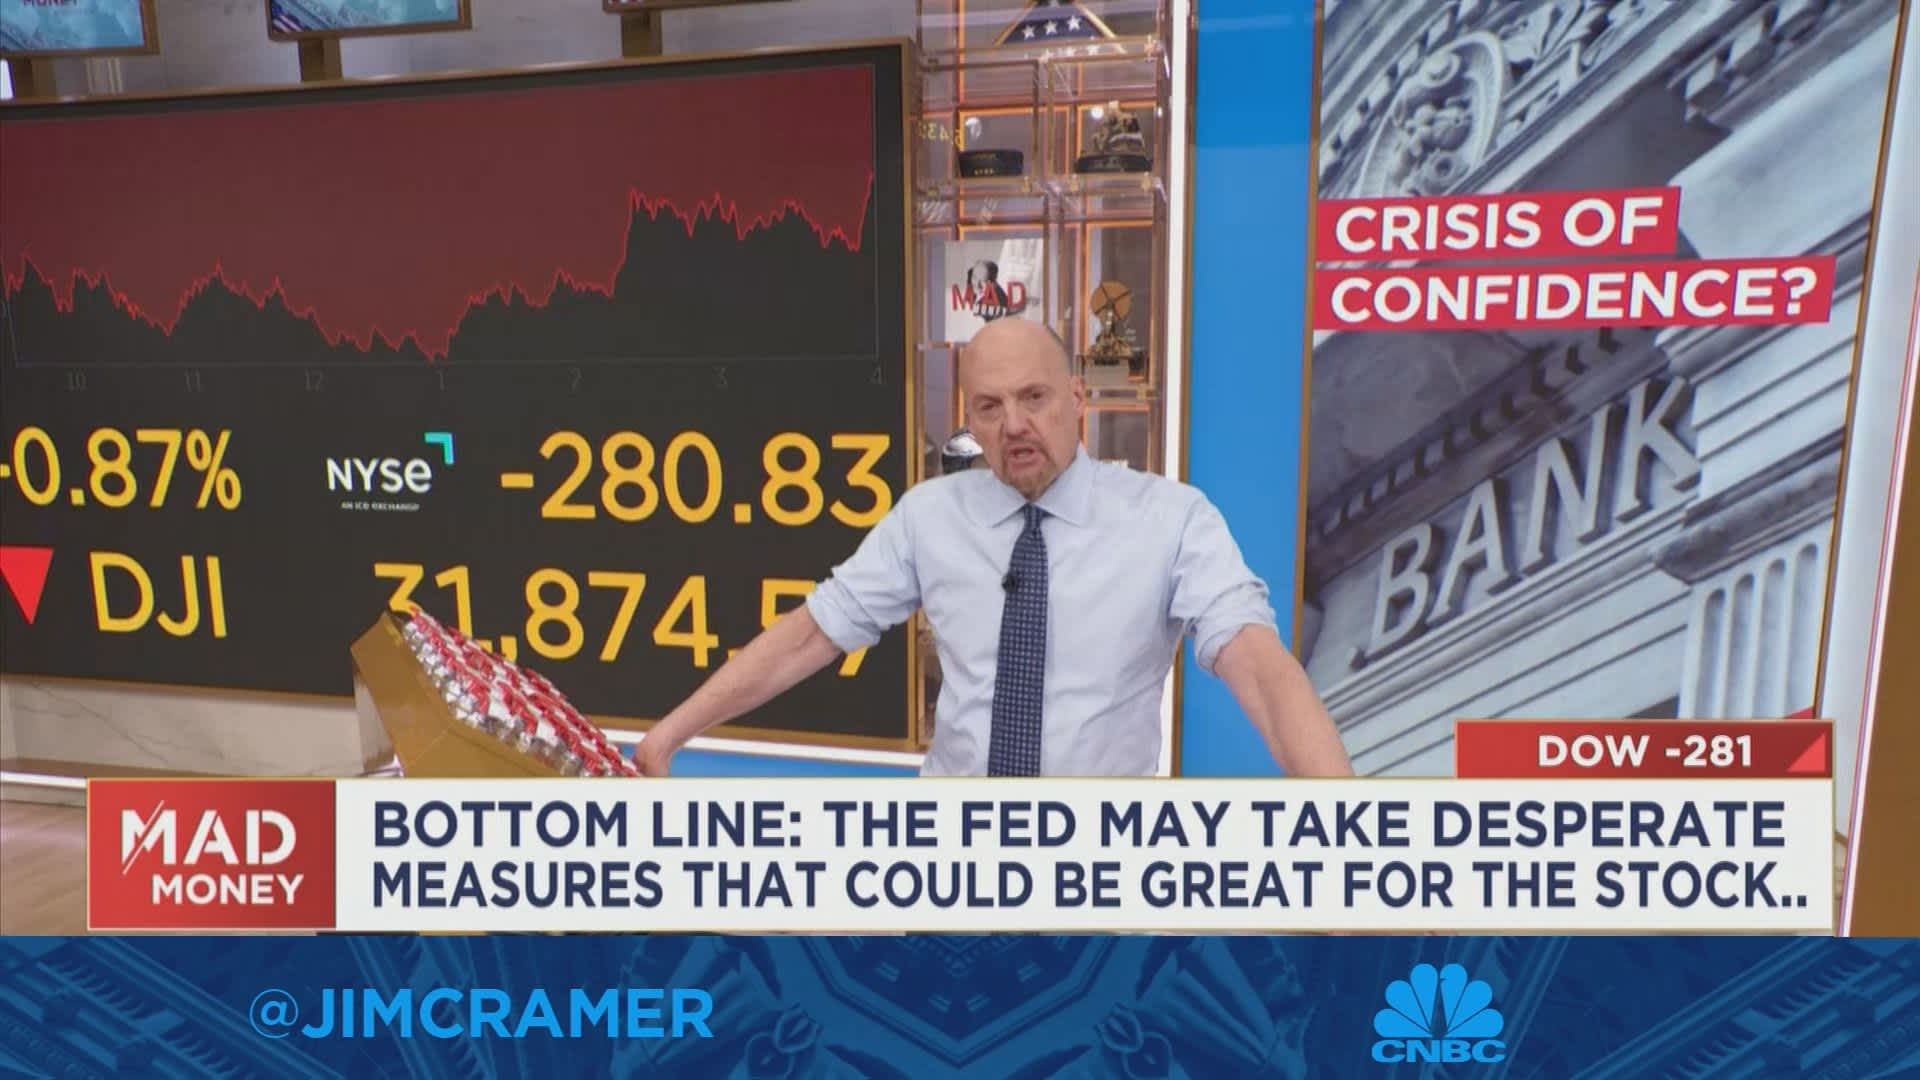 Cramer says the Fed may need to take drastic measures